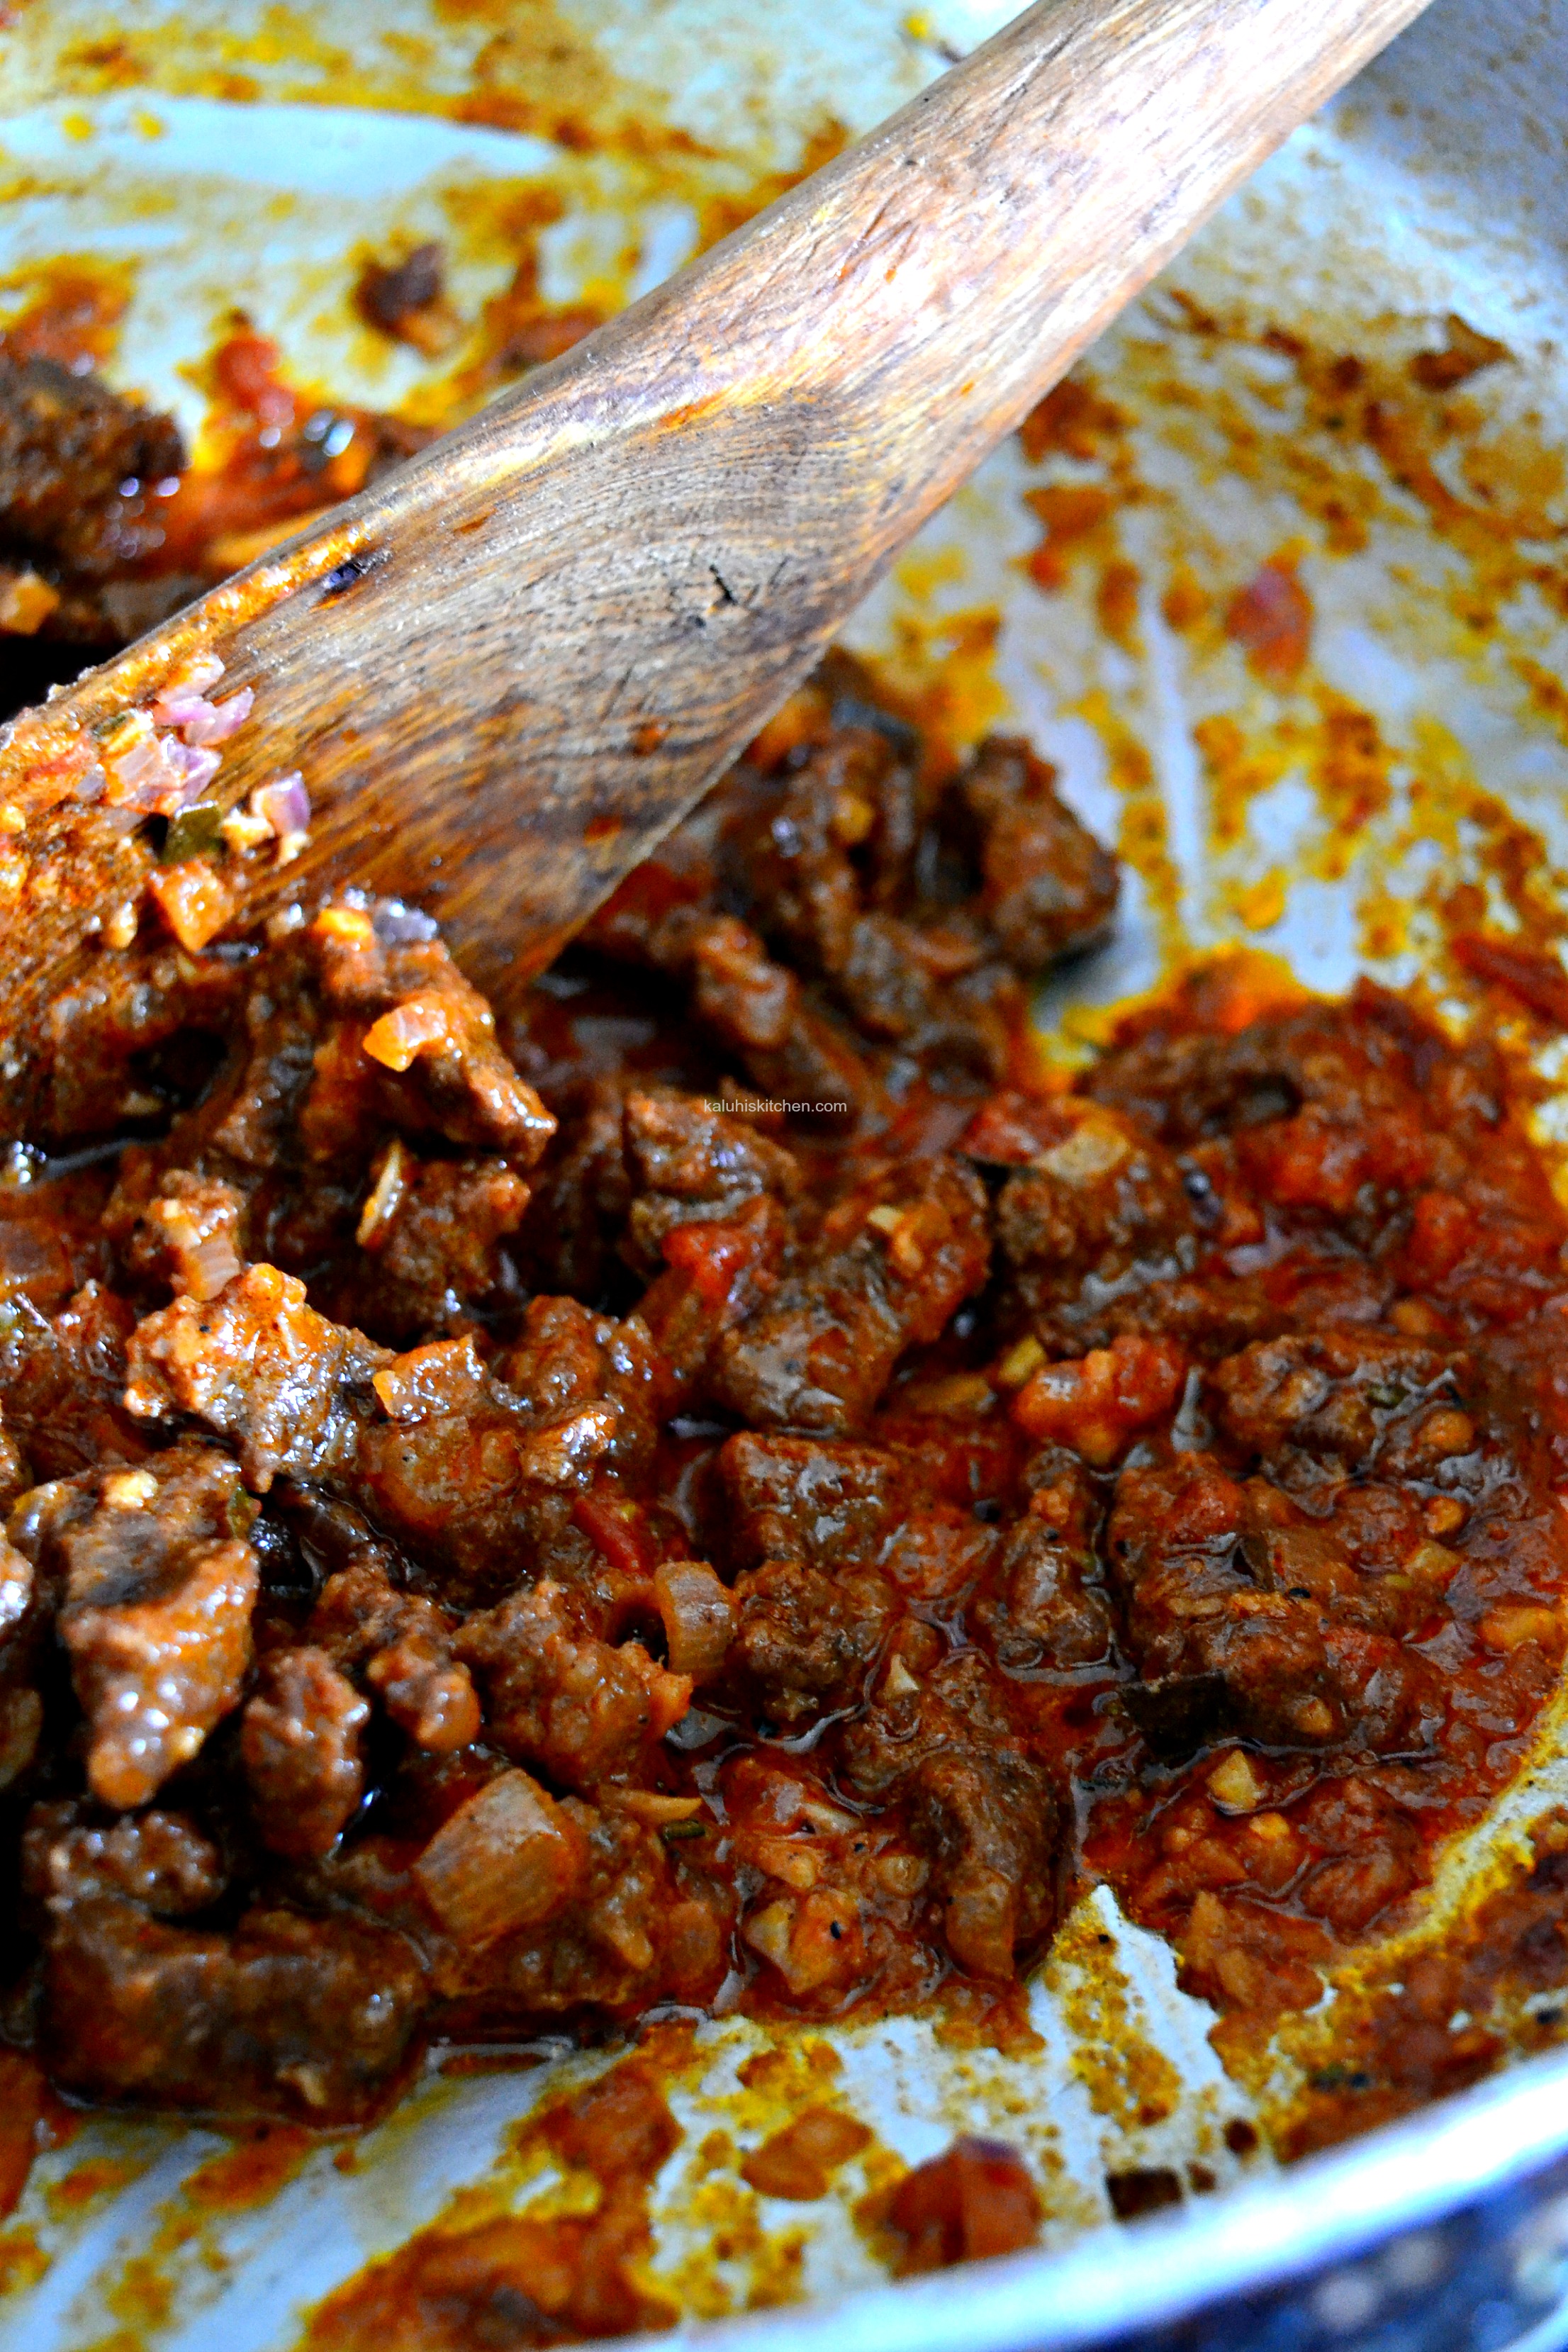 once-the-beef-is-cooked-through-add-some-fresh-coriander-over-it-and-serve_kaluhiskitchen-com_how-to-cook-beef_kenyan-food_fusion-cuisine